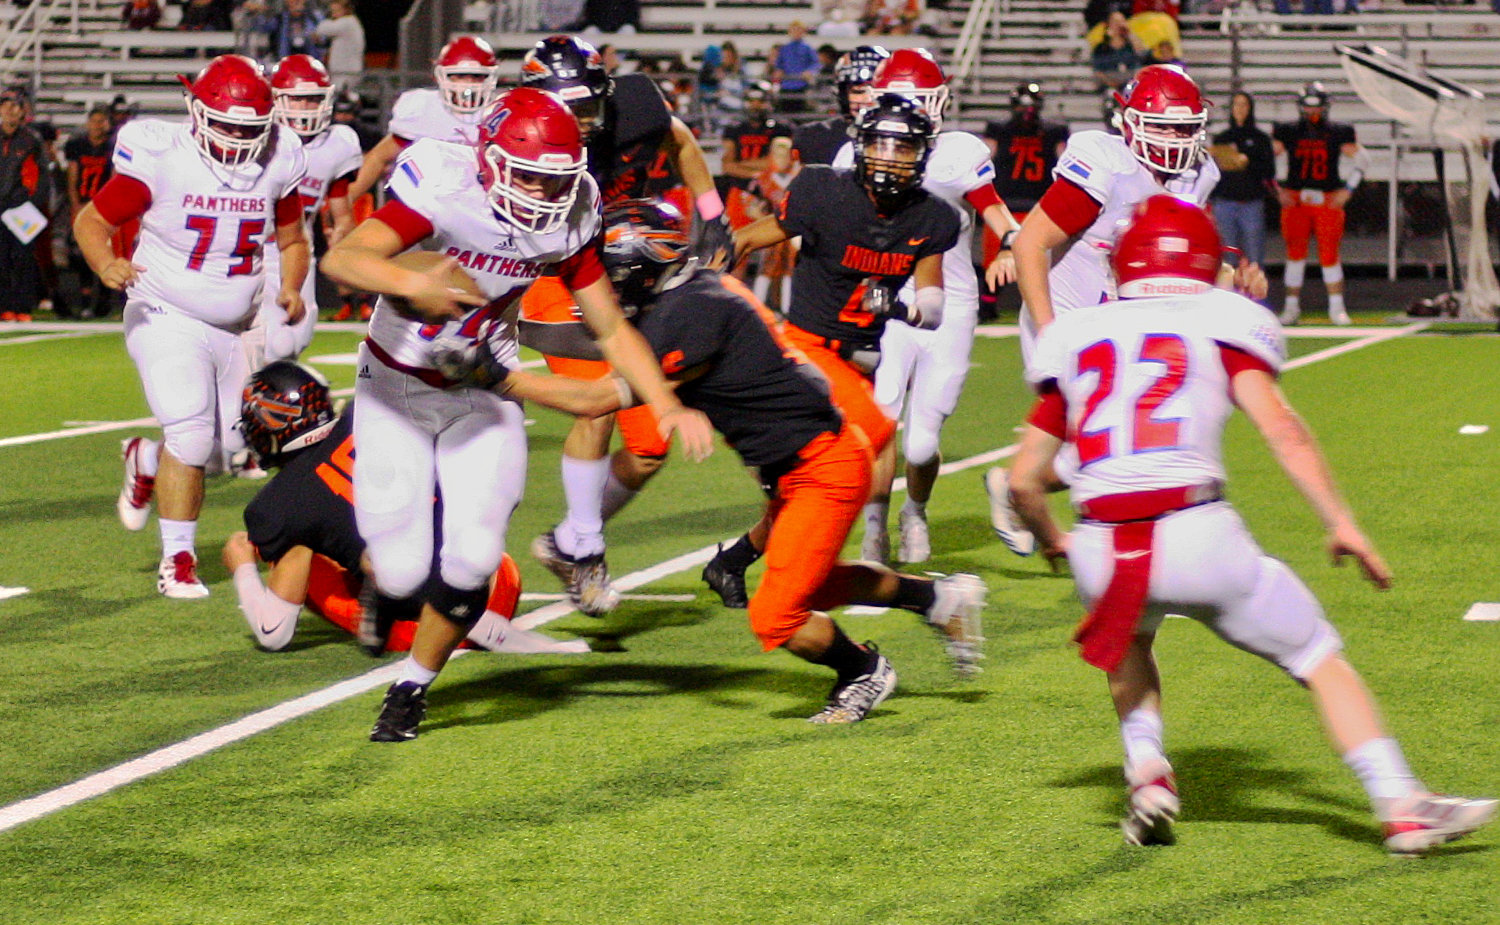 Alba-Golden offensive yards were hard to come by against an aggressive Grand Saline defense last Friday.